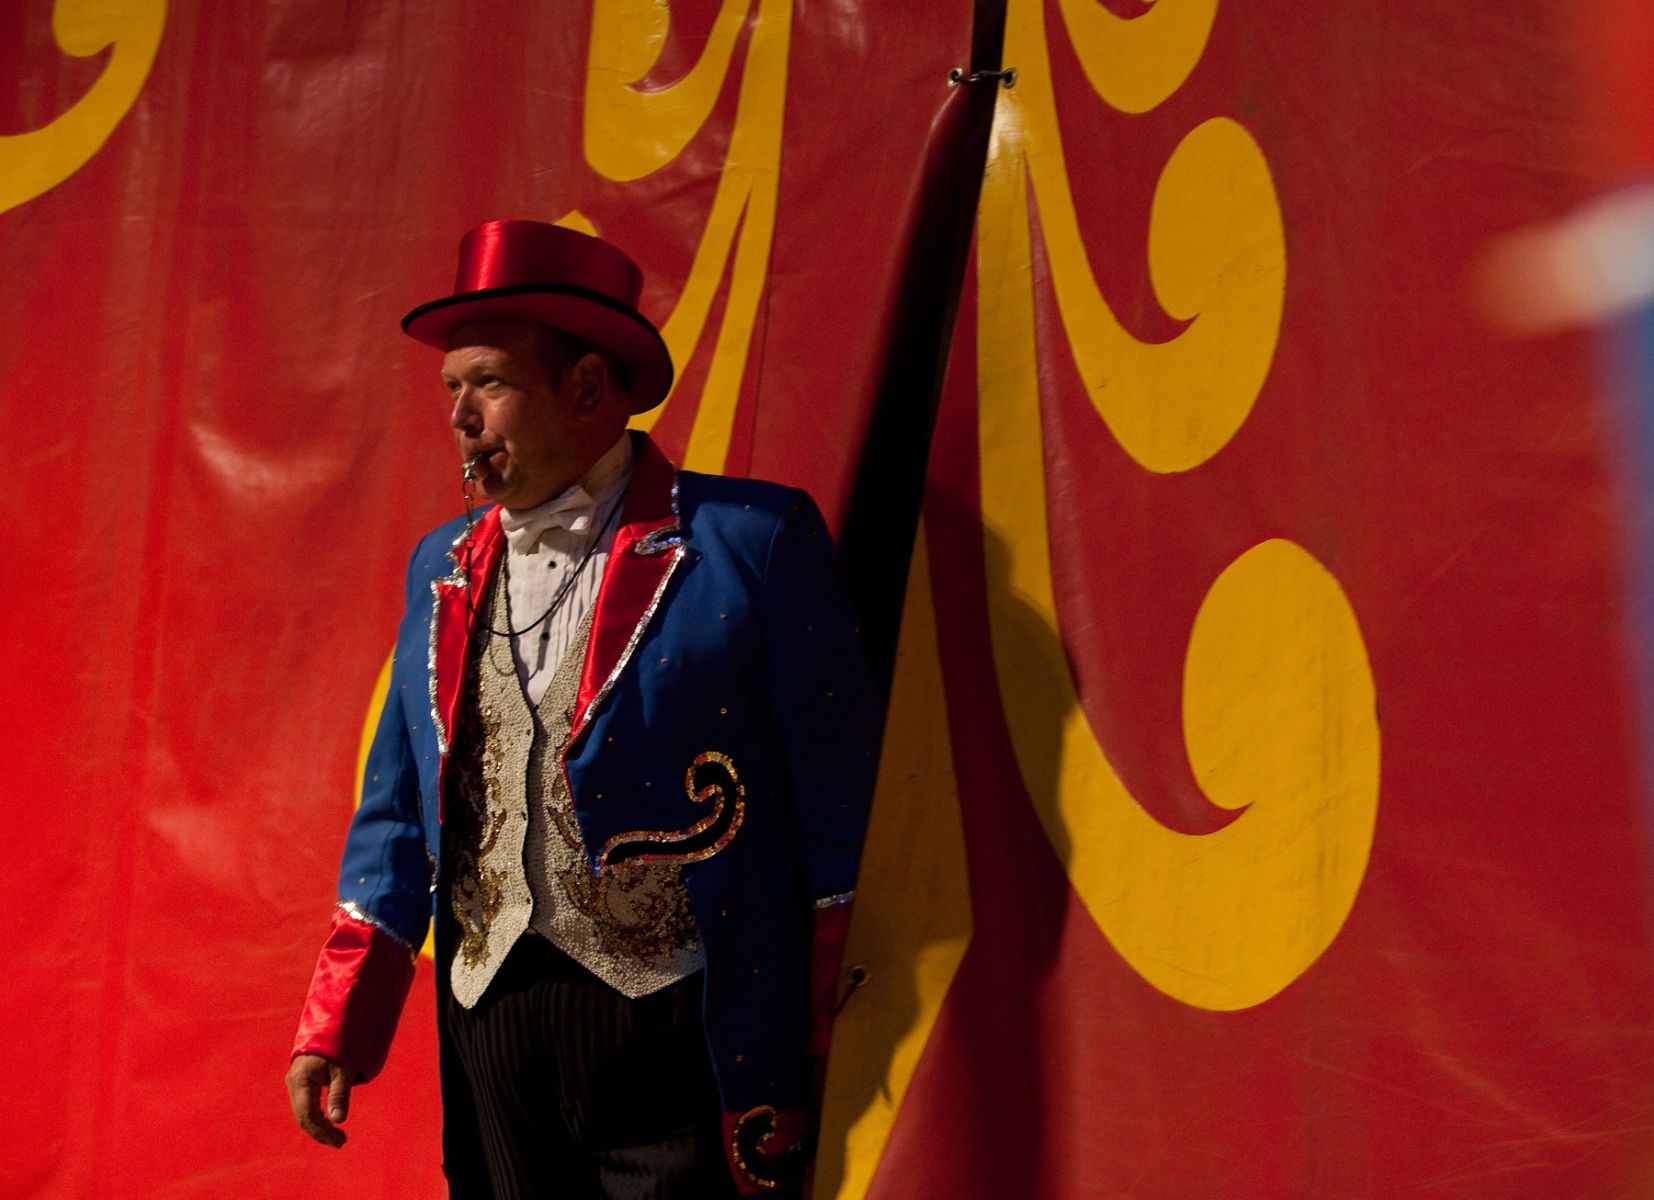 Ringmaster Chris Connors starts the second show of the evening with a blow of his whistle during the Cole Brothers Circus of the Stars stop in Myrtle Beach, South Carolina March 31, 2013. Traveling circuses such as the Cole Brothers Circus of the Stars, complete with it's traveling big top tent, set up their tent city in smaller markets all along the East Coast of the United States as they aim to bring the circus to rural areas. The Cole Brothers Circus, now in its 129th edition, travels to 100 cities in 20-25 states and stages 250 shows a year.   REUTERS/Randall Hill   (UNITED STATES)